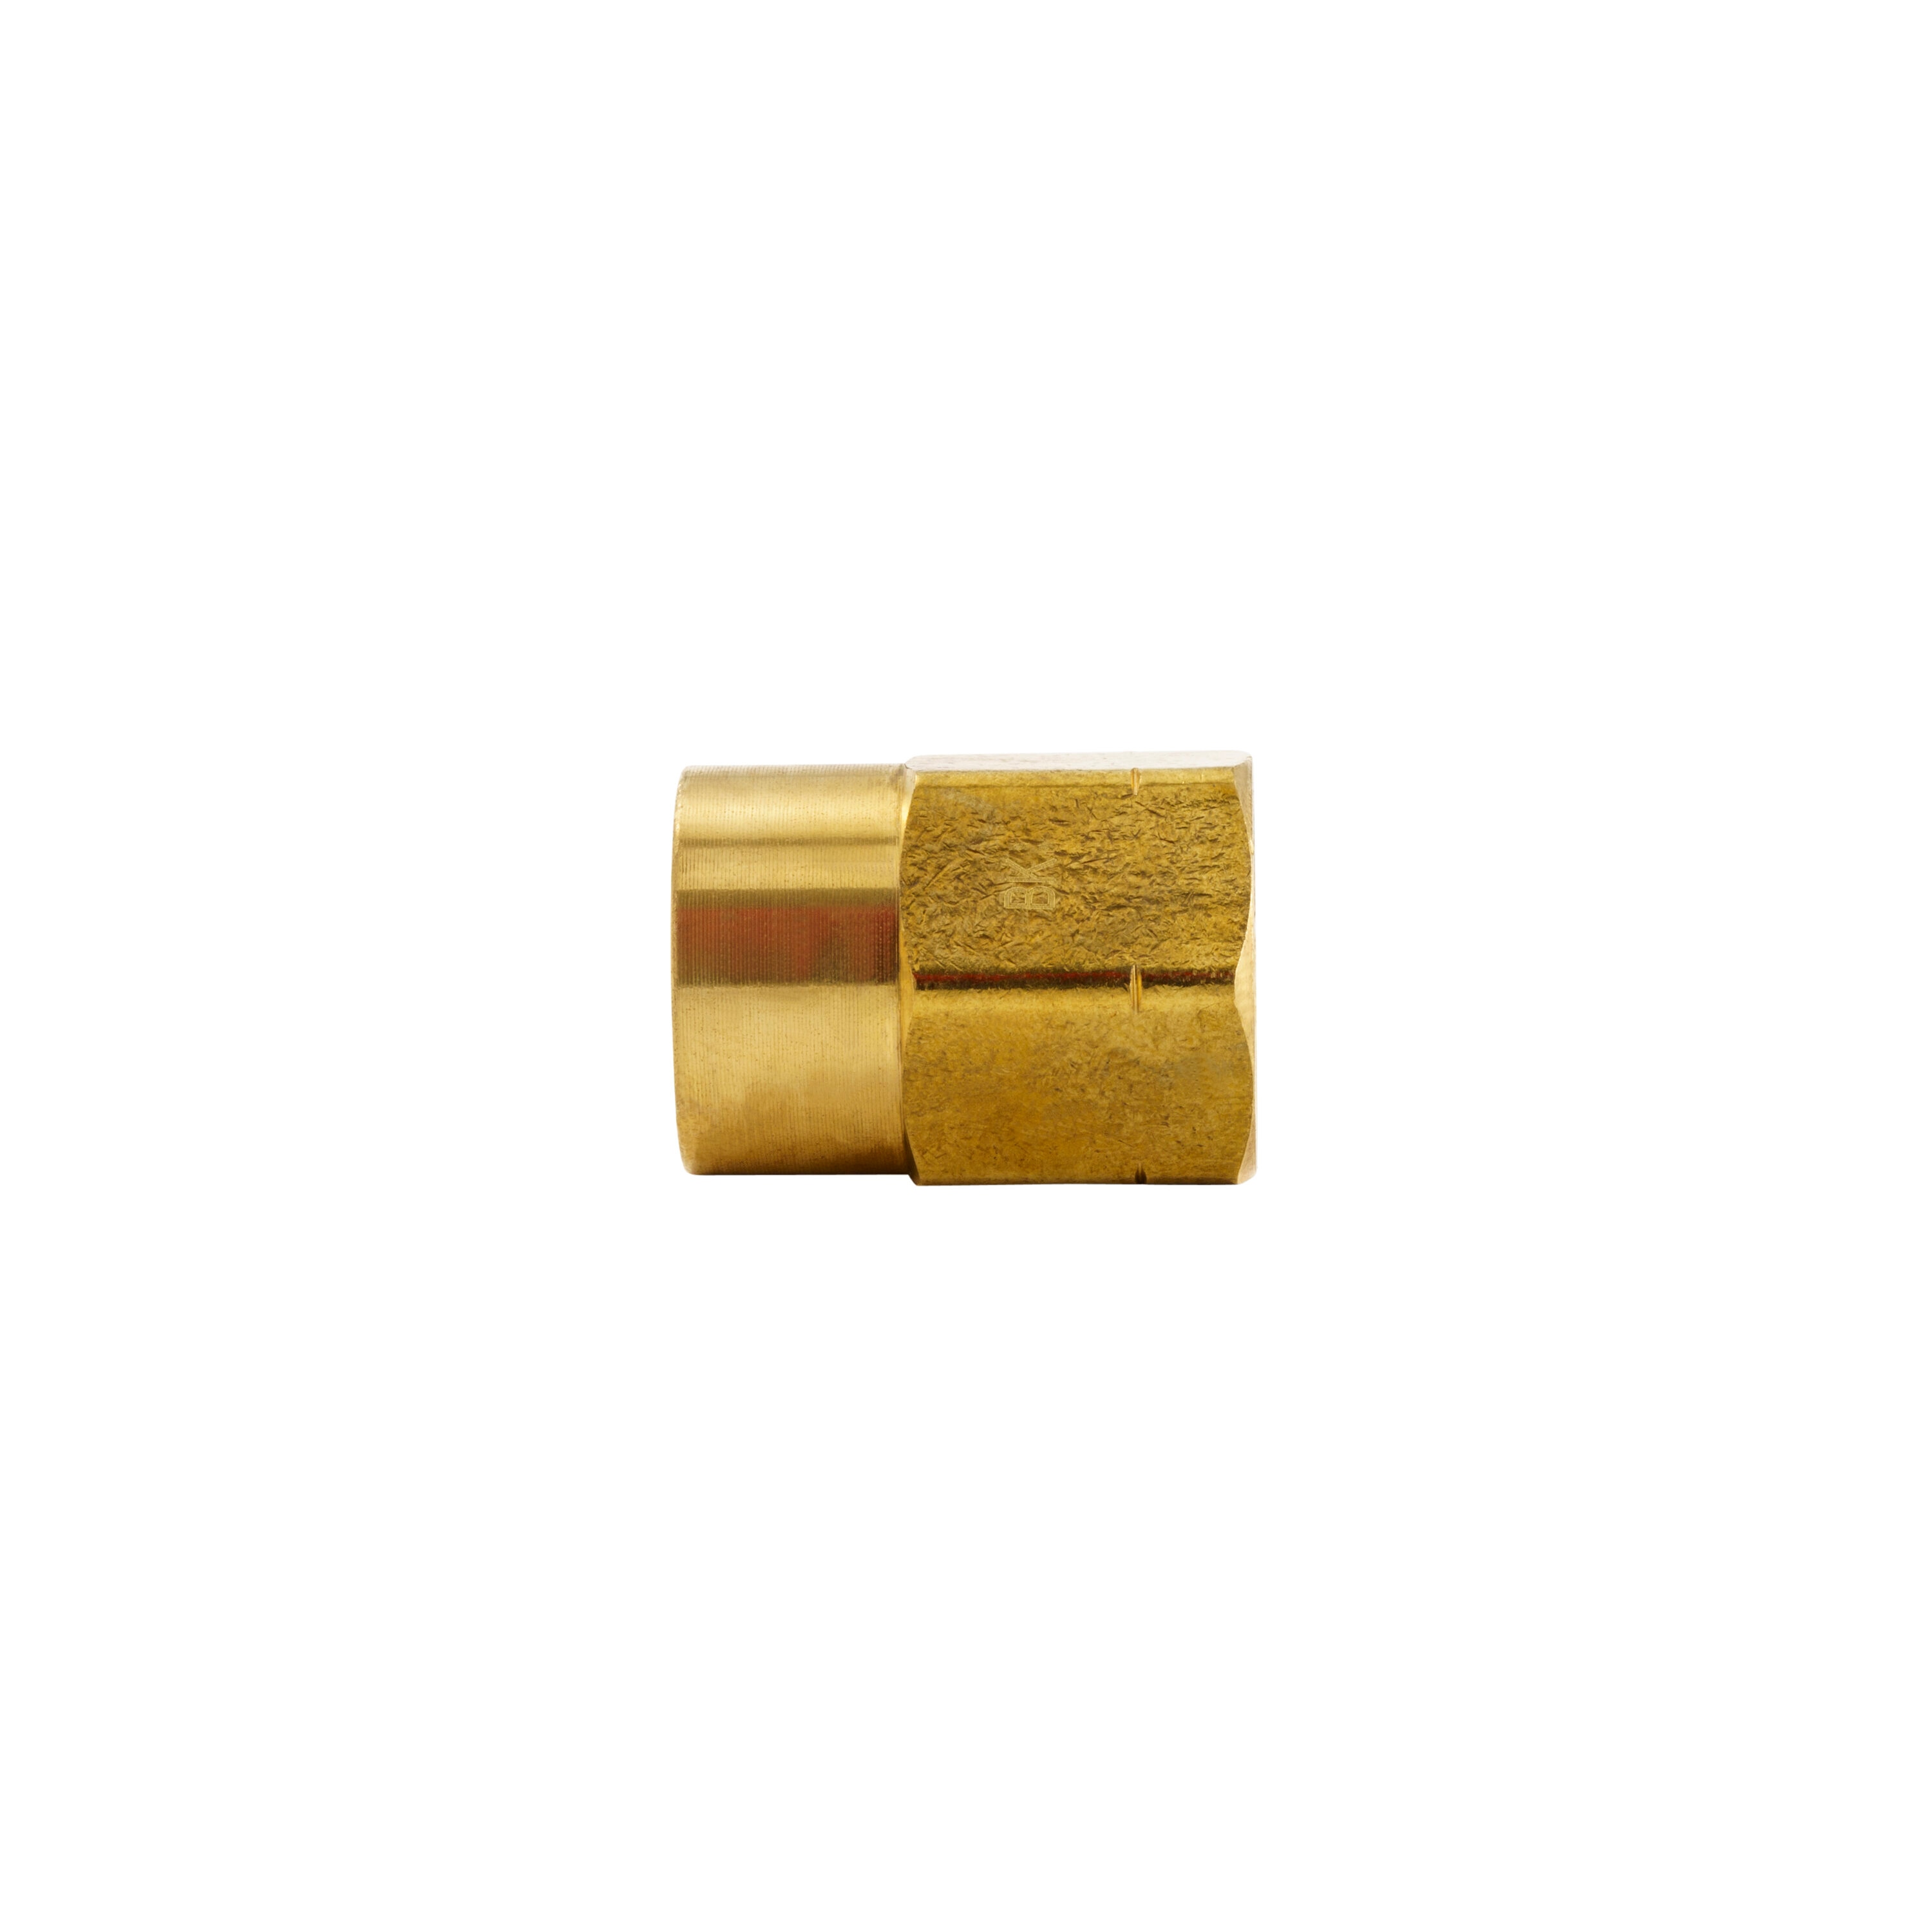 Proline Series 1/2-in x 1/2-in Compression Coupling Fitting in the Brass  Fittings department at